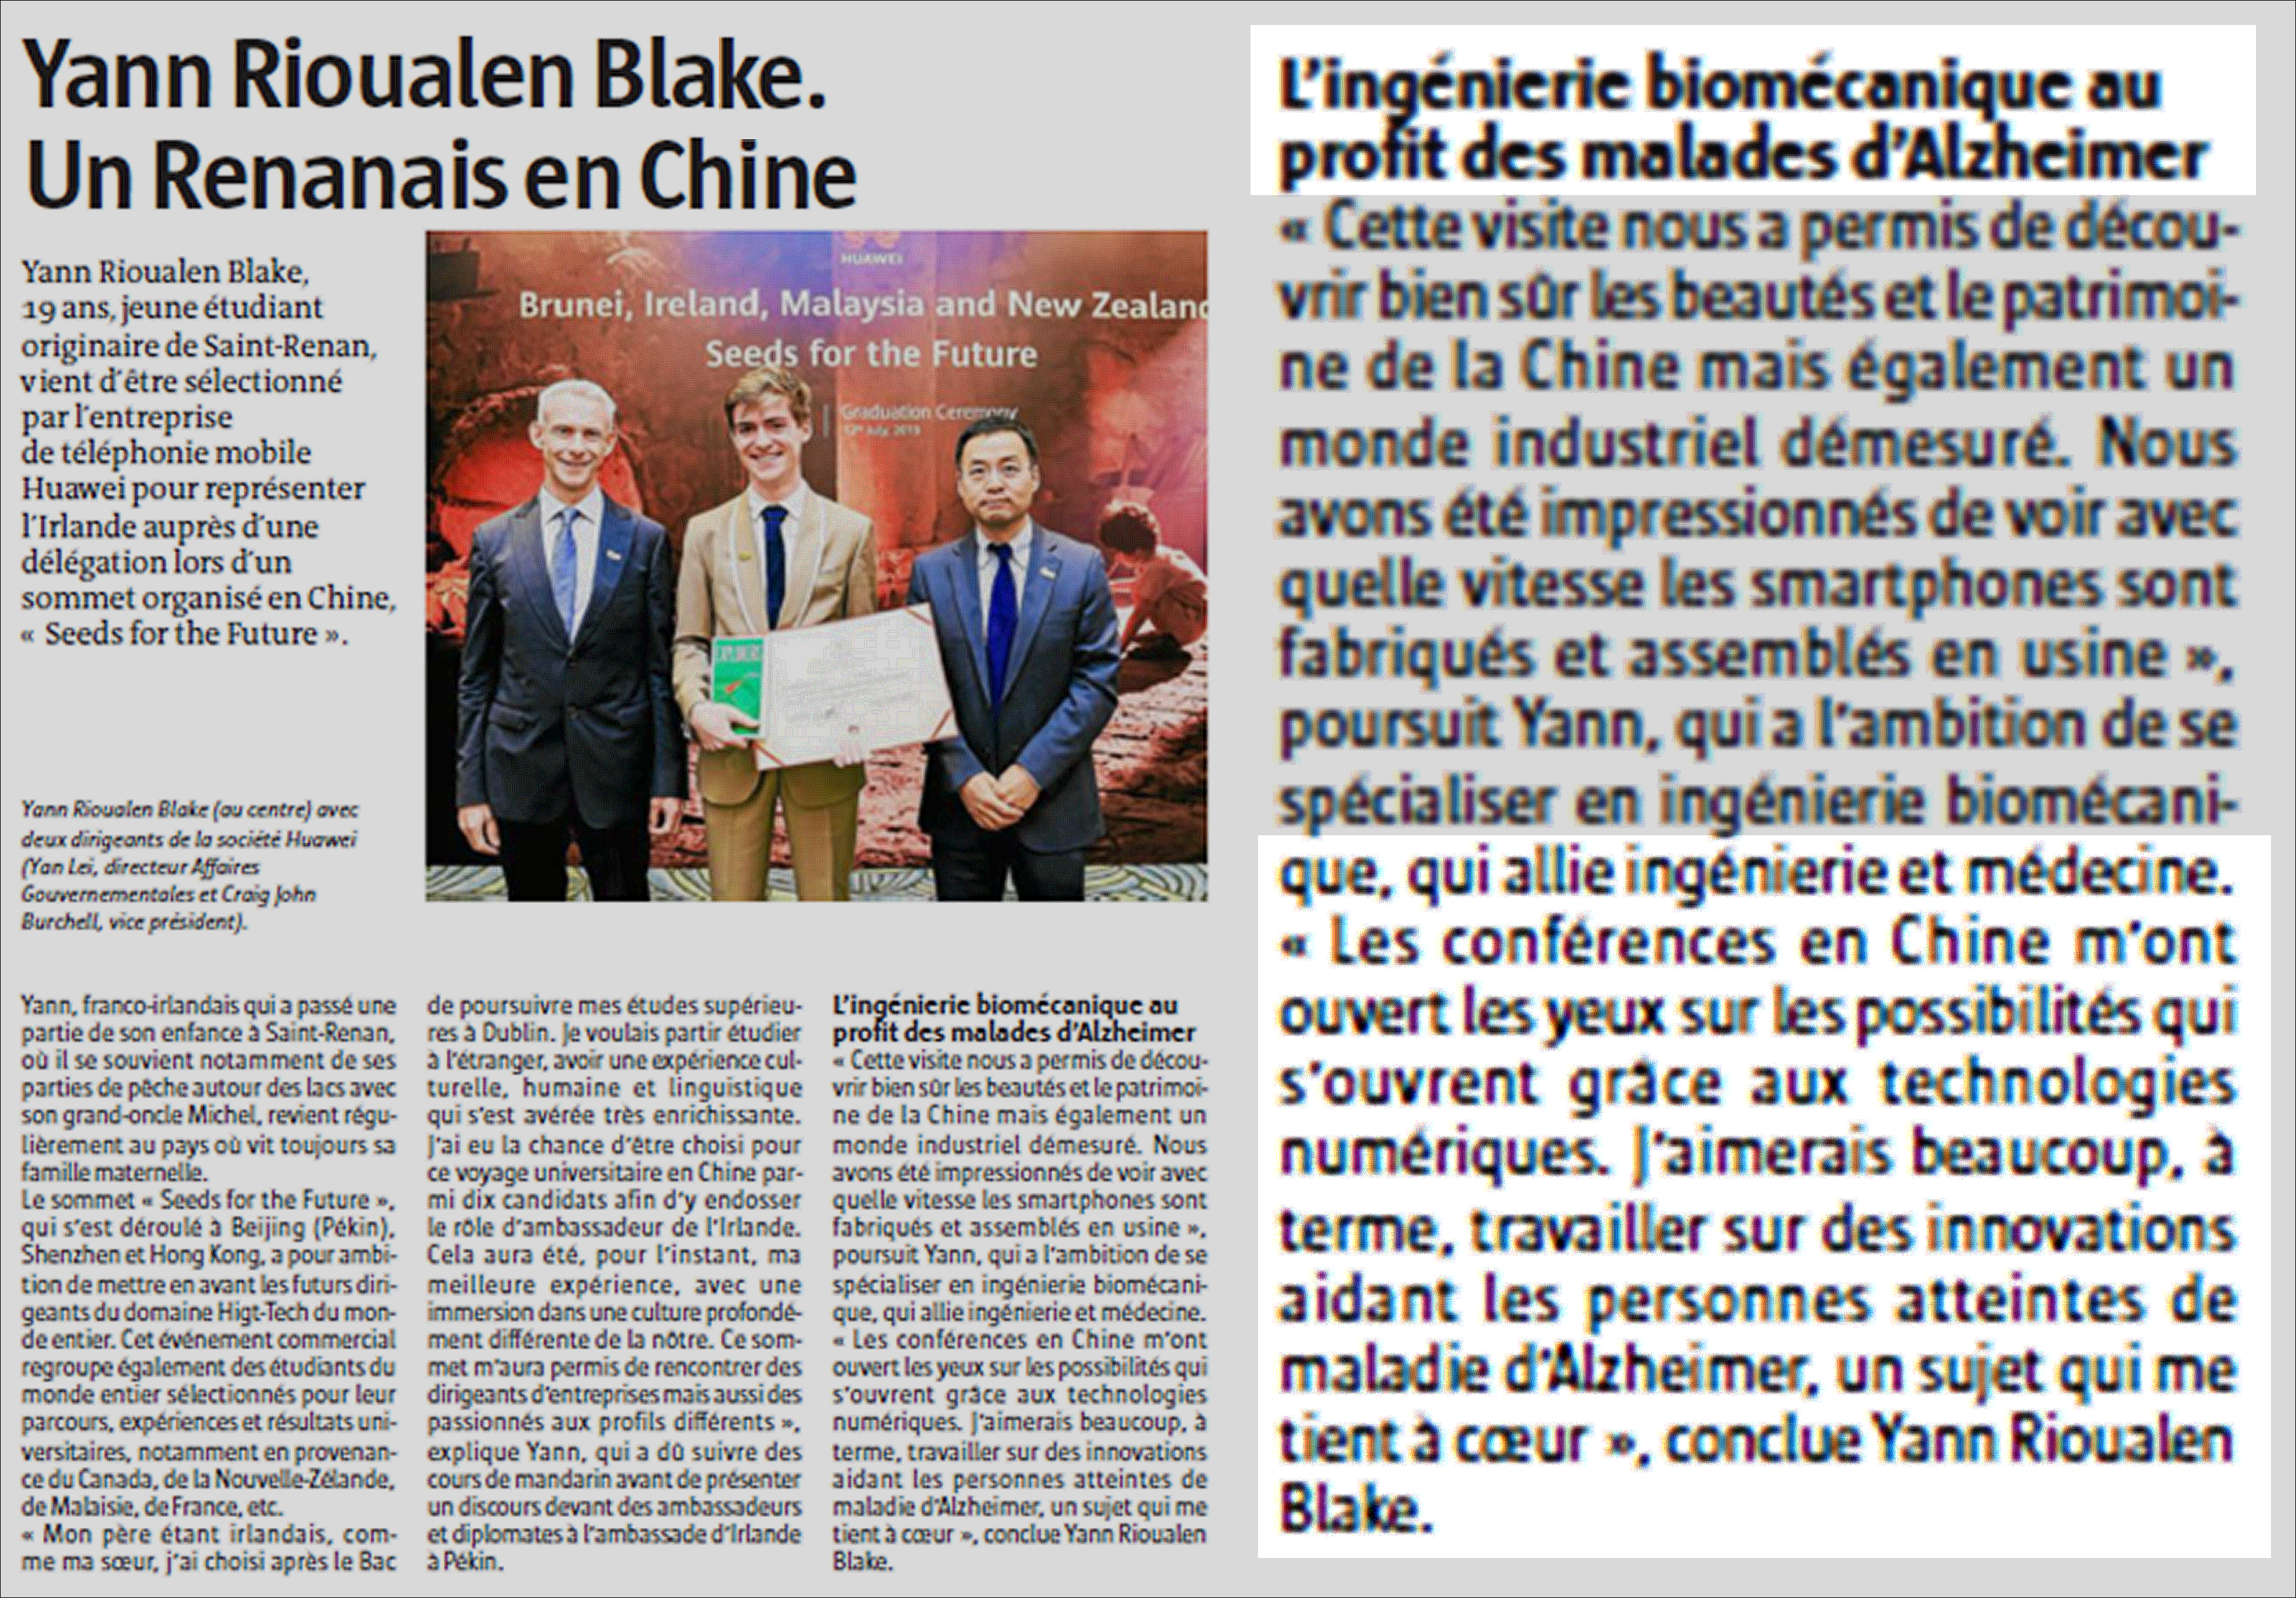 Article in the French newspaper "Télégramme" citing my work on AD (in an article on a Tech Summit in China)